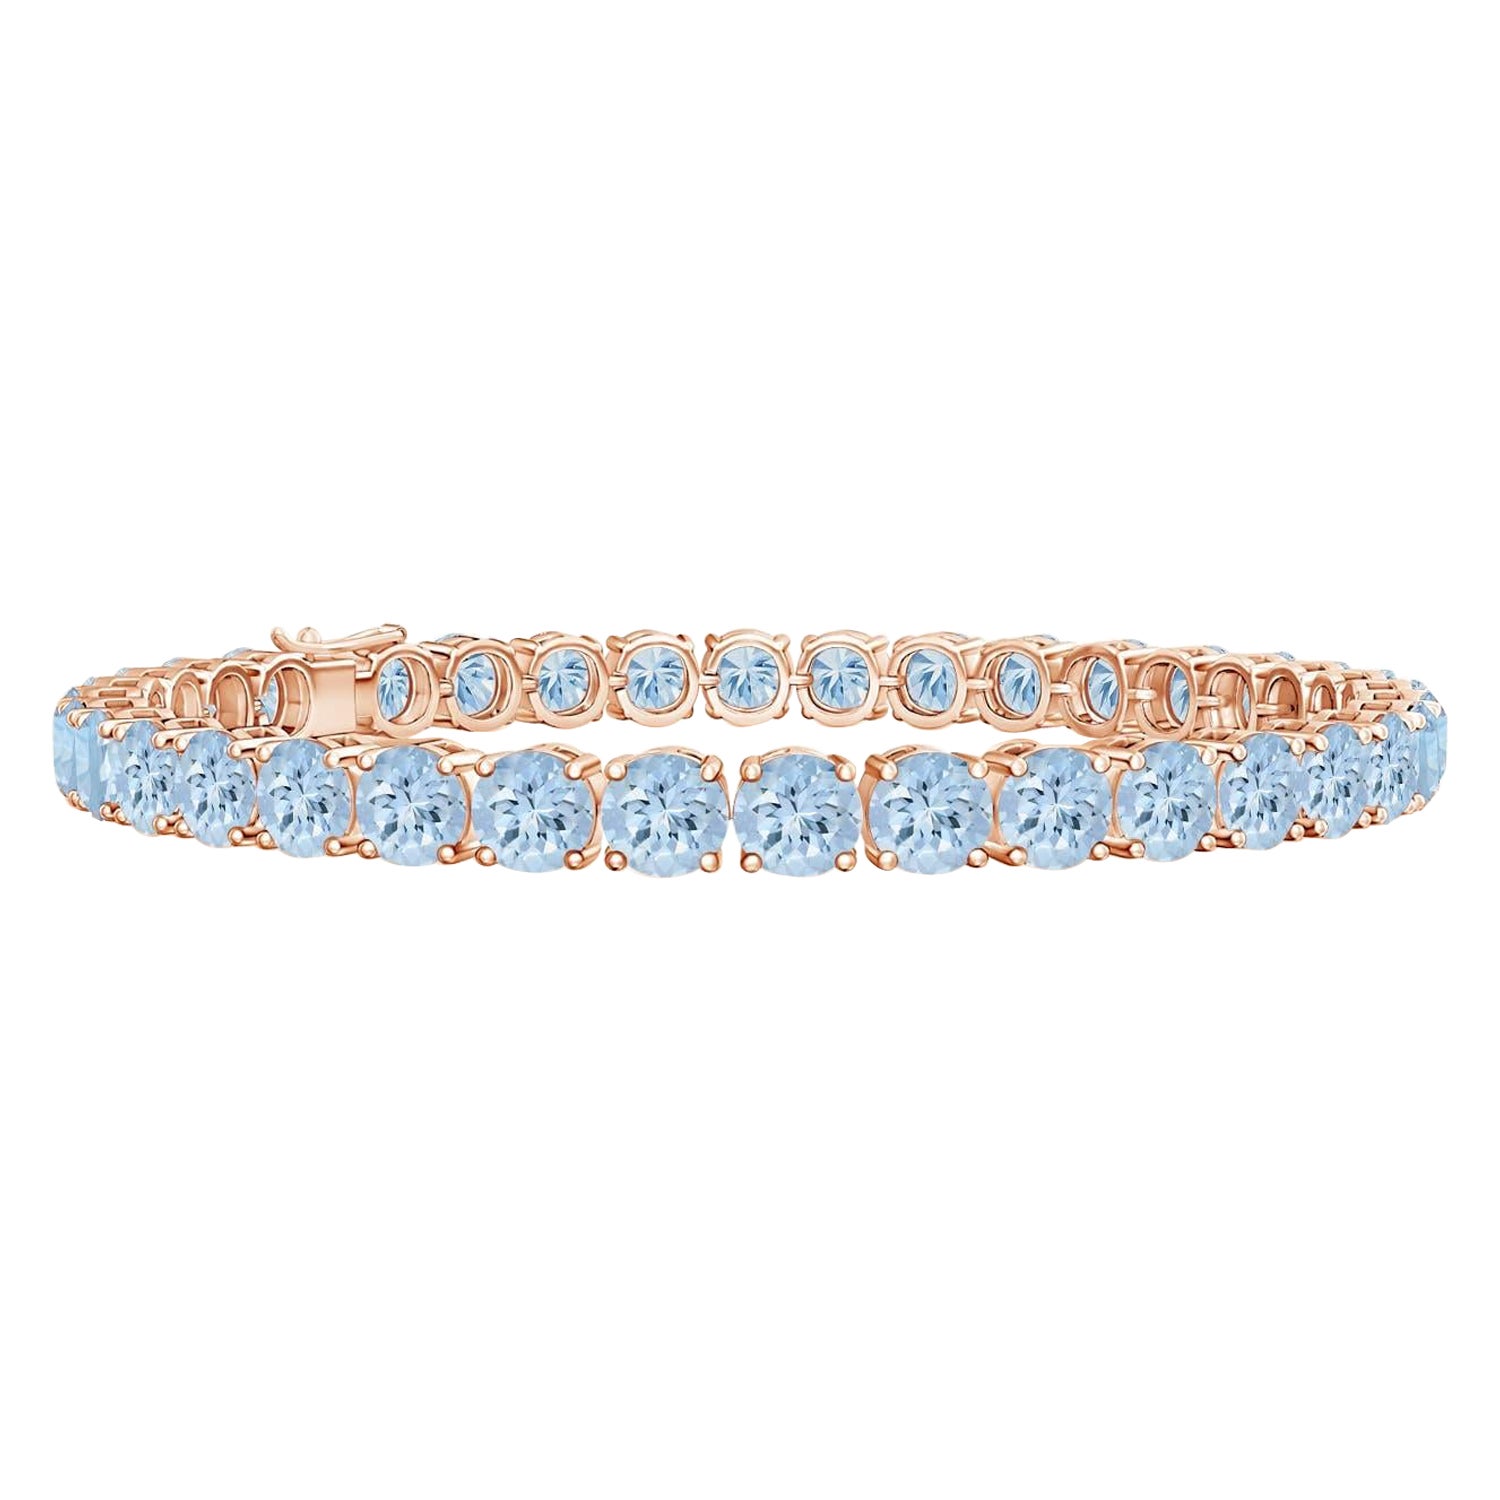 Classic 14,00ct Aquamarin Linear Tennis-Armband in 14K Rose Gold